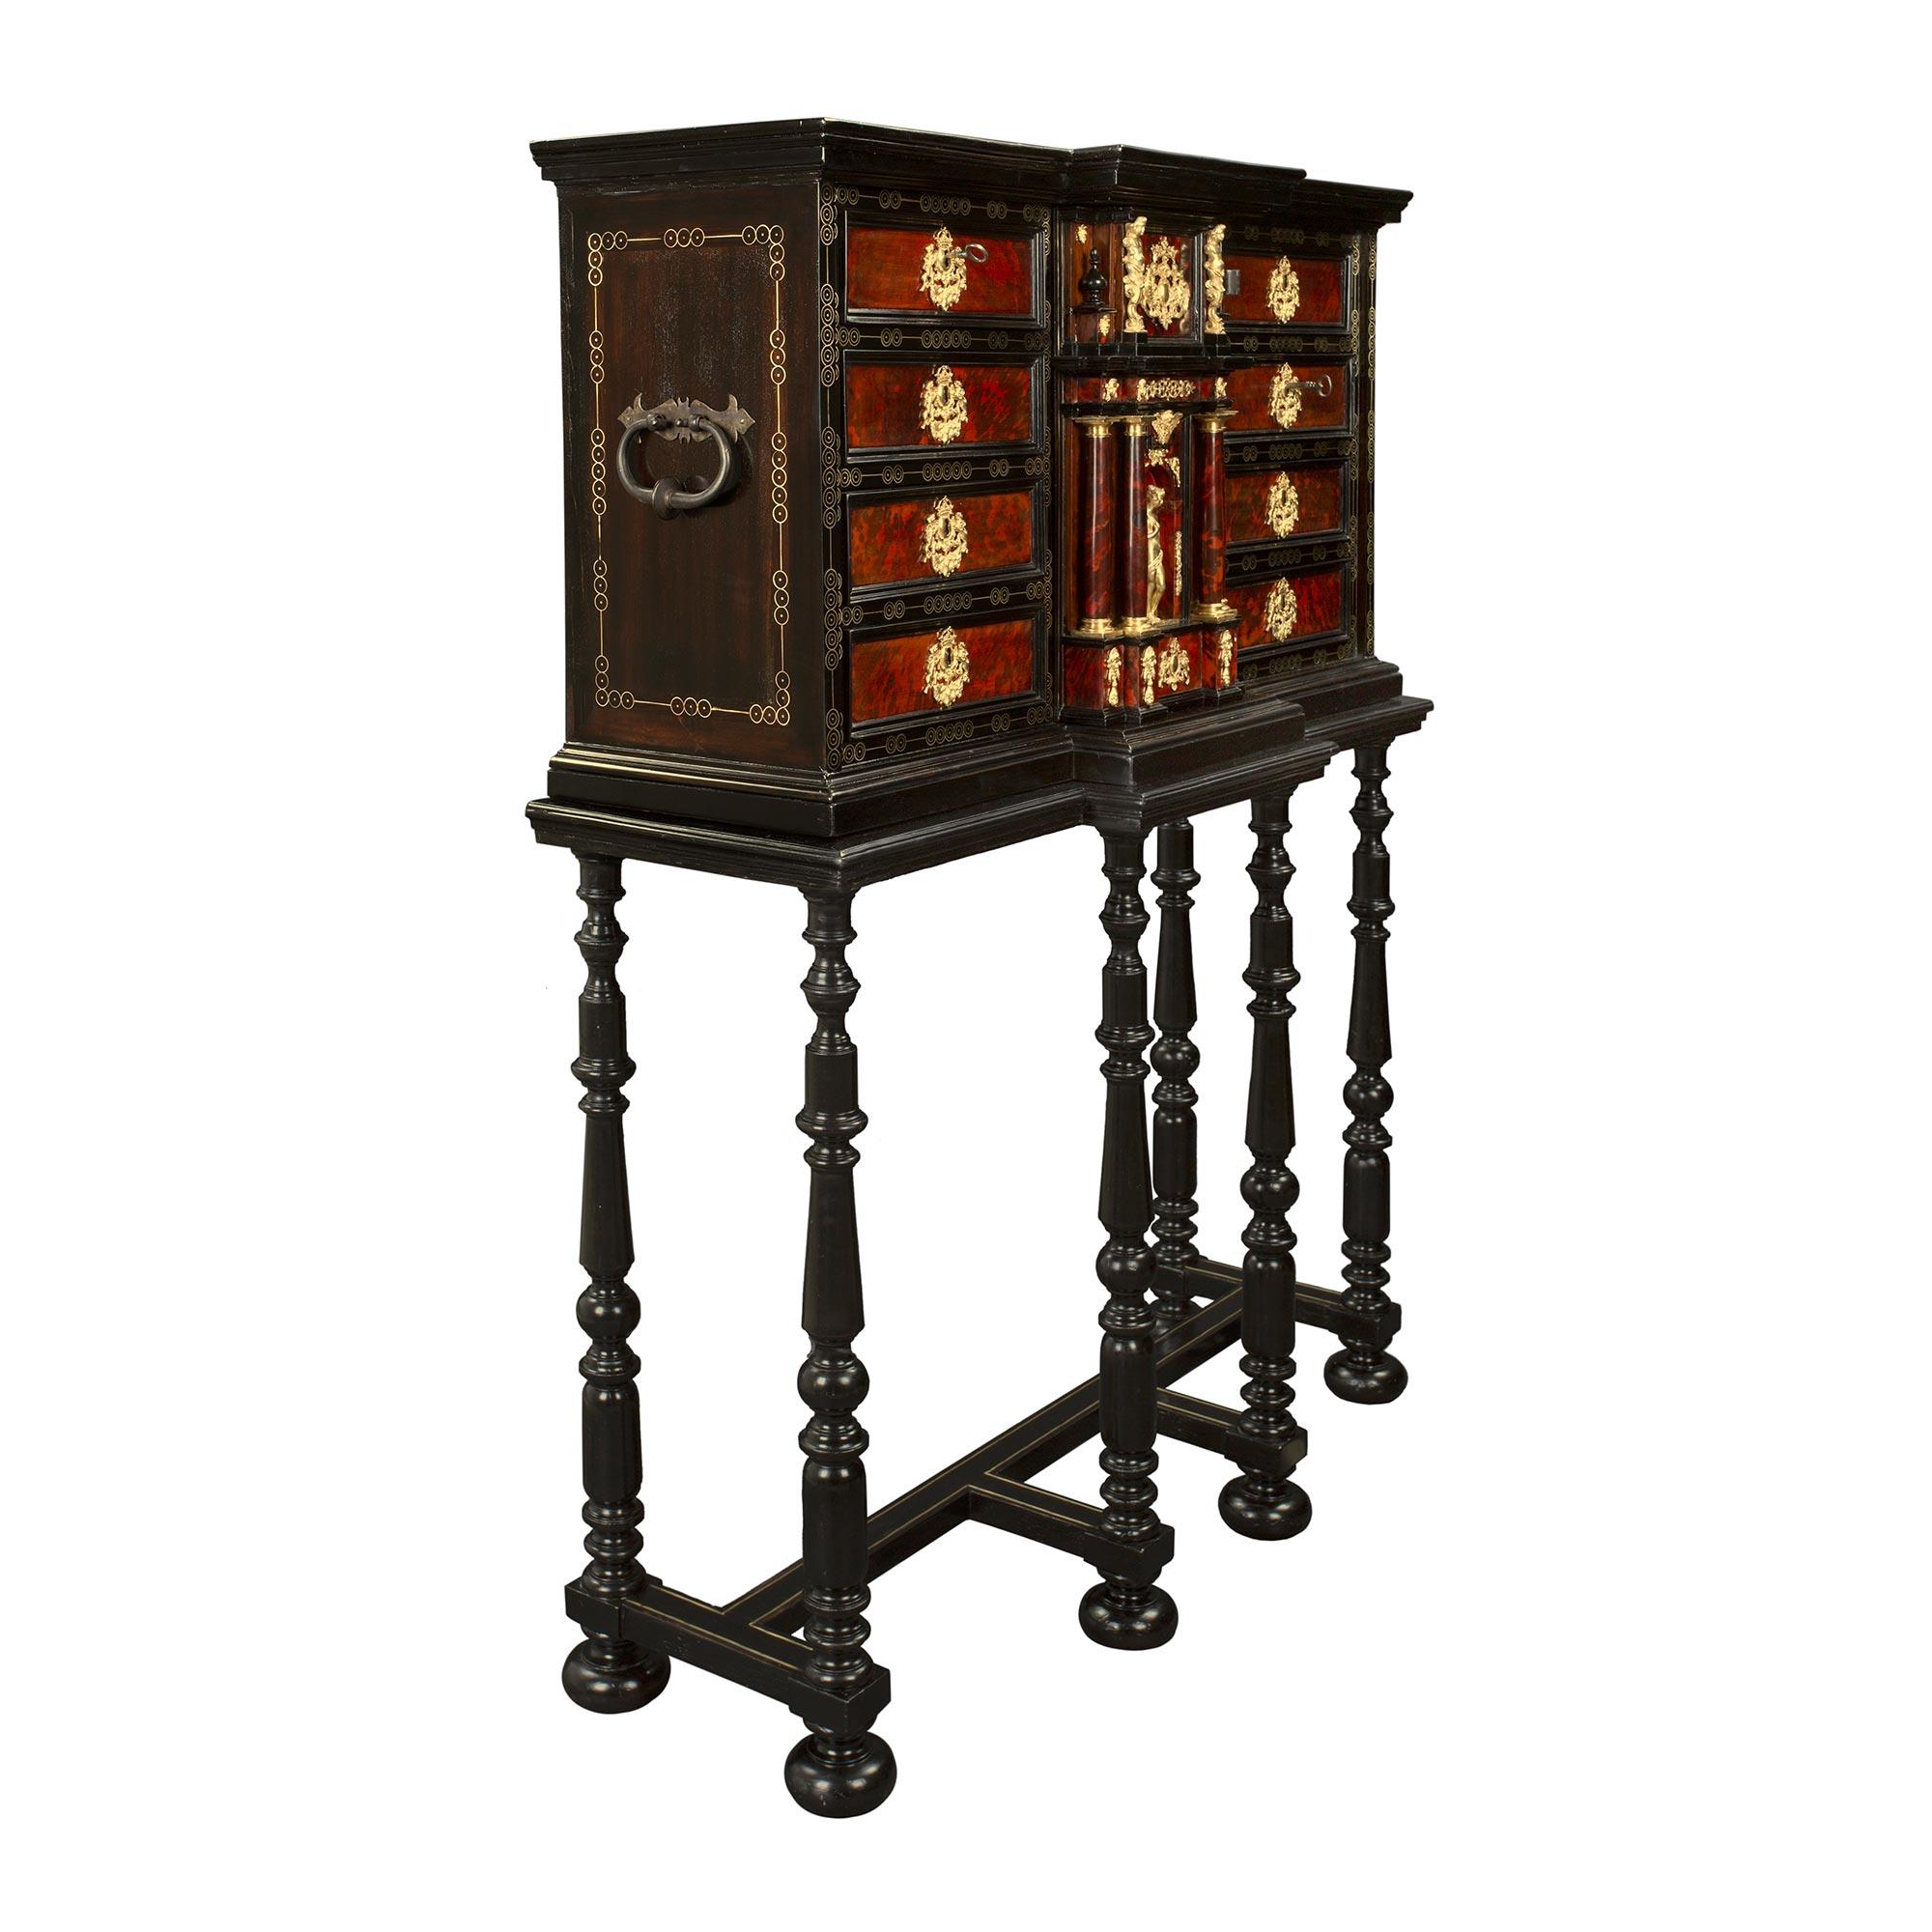 A spectacular and most decorative Spanish Baroque 18th century ebony, brass, gilt metal, iron and tortoise shell specimen cabinet on the original stand. The cabinet is raised by six elegant turned ebony legs with fine bun feet and a square stretcher